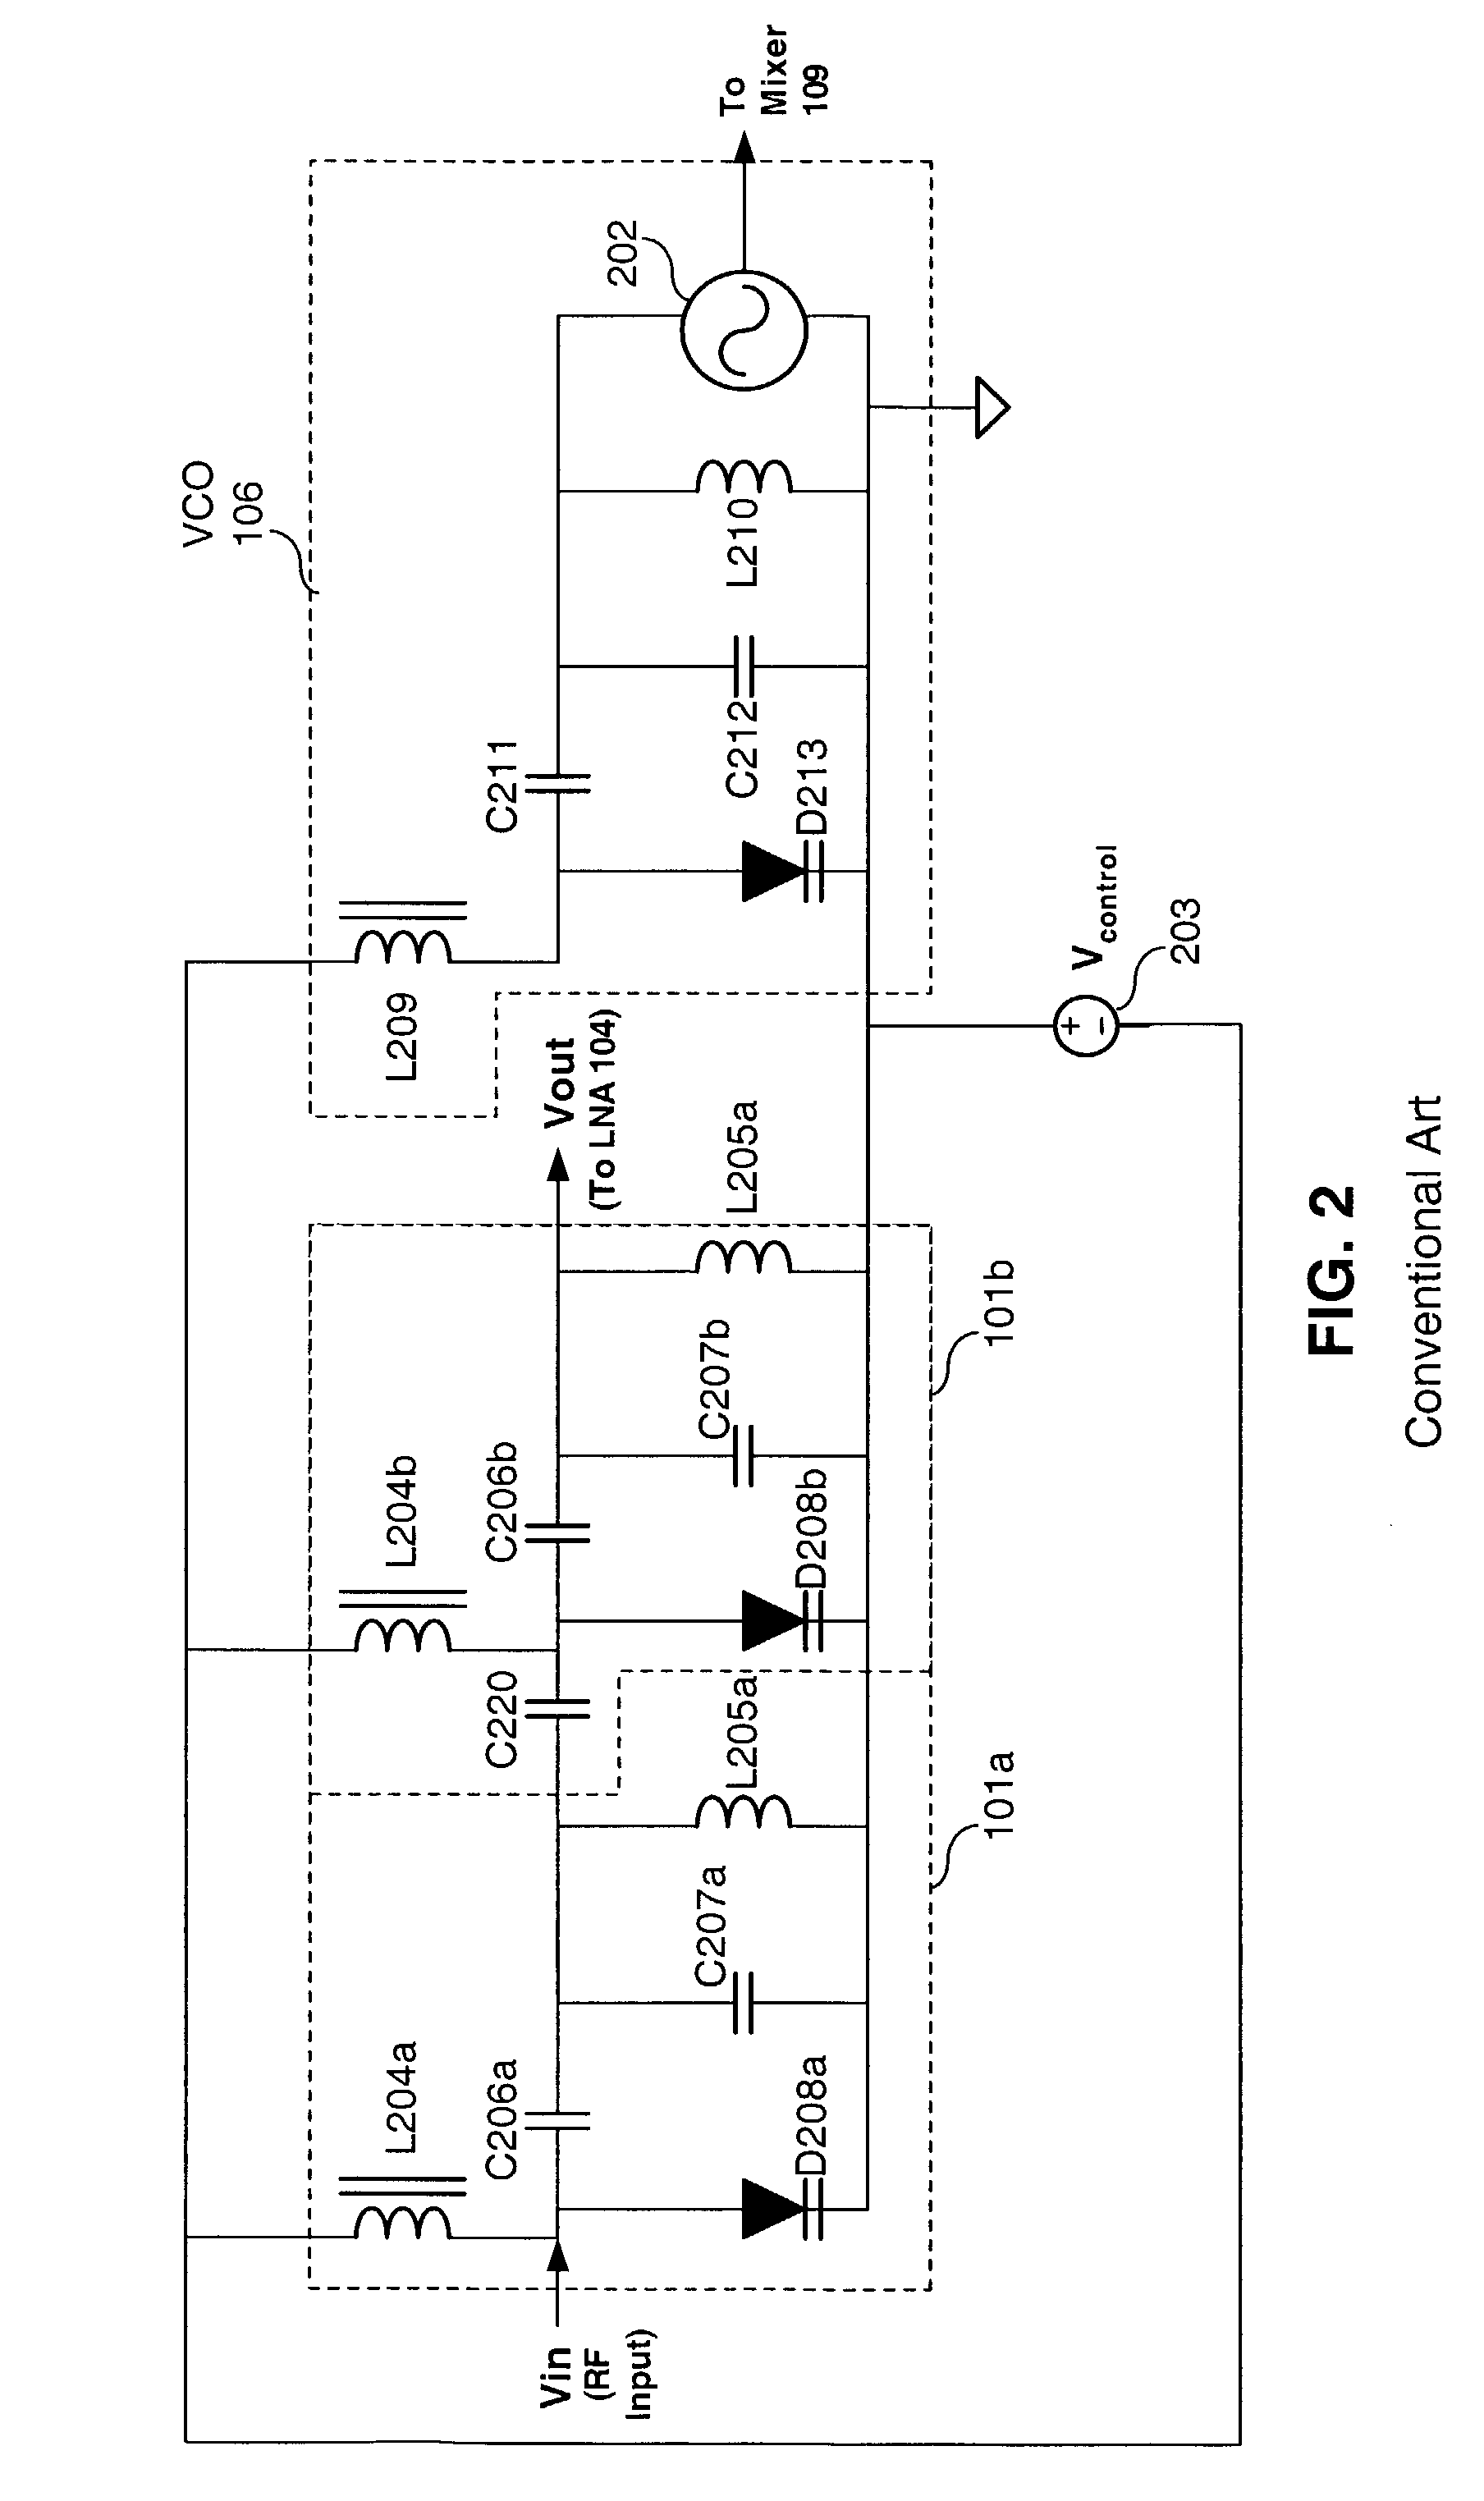 Integrated tracking filters for direct conversion and low-IF single conversion broadband filters